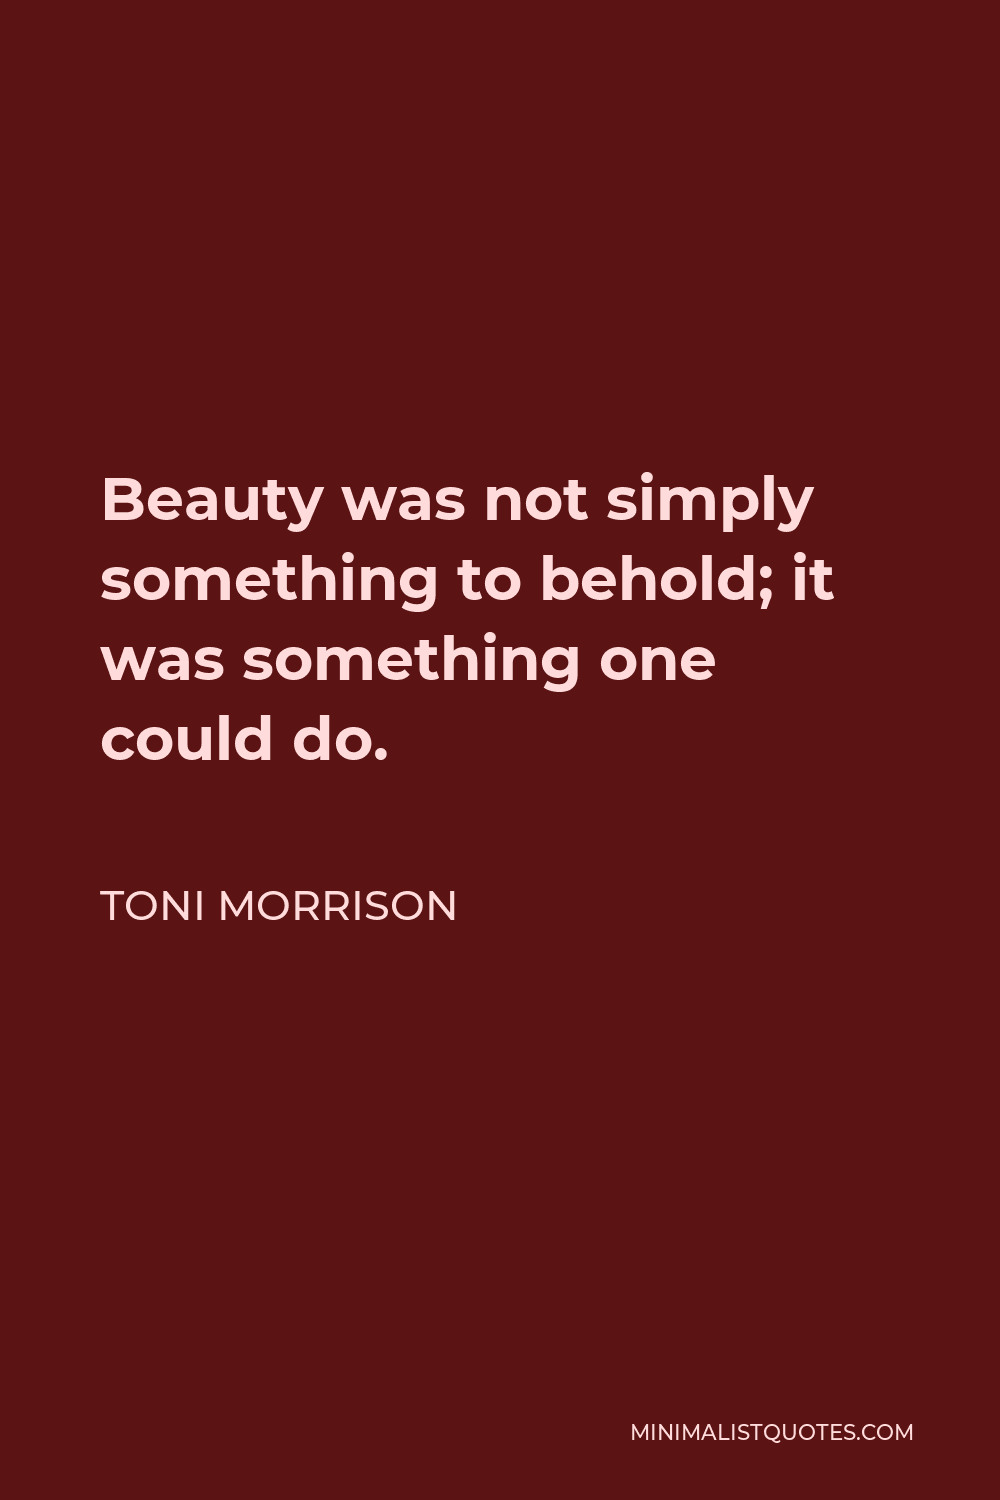 Toni Morrison Quote - Beauty was not simply something to behold; it was something one could do.